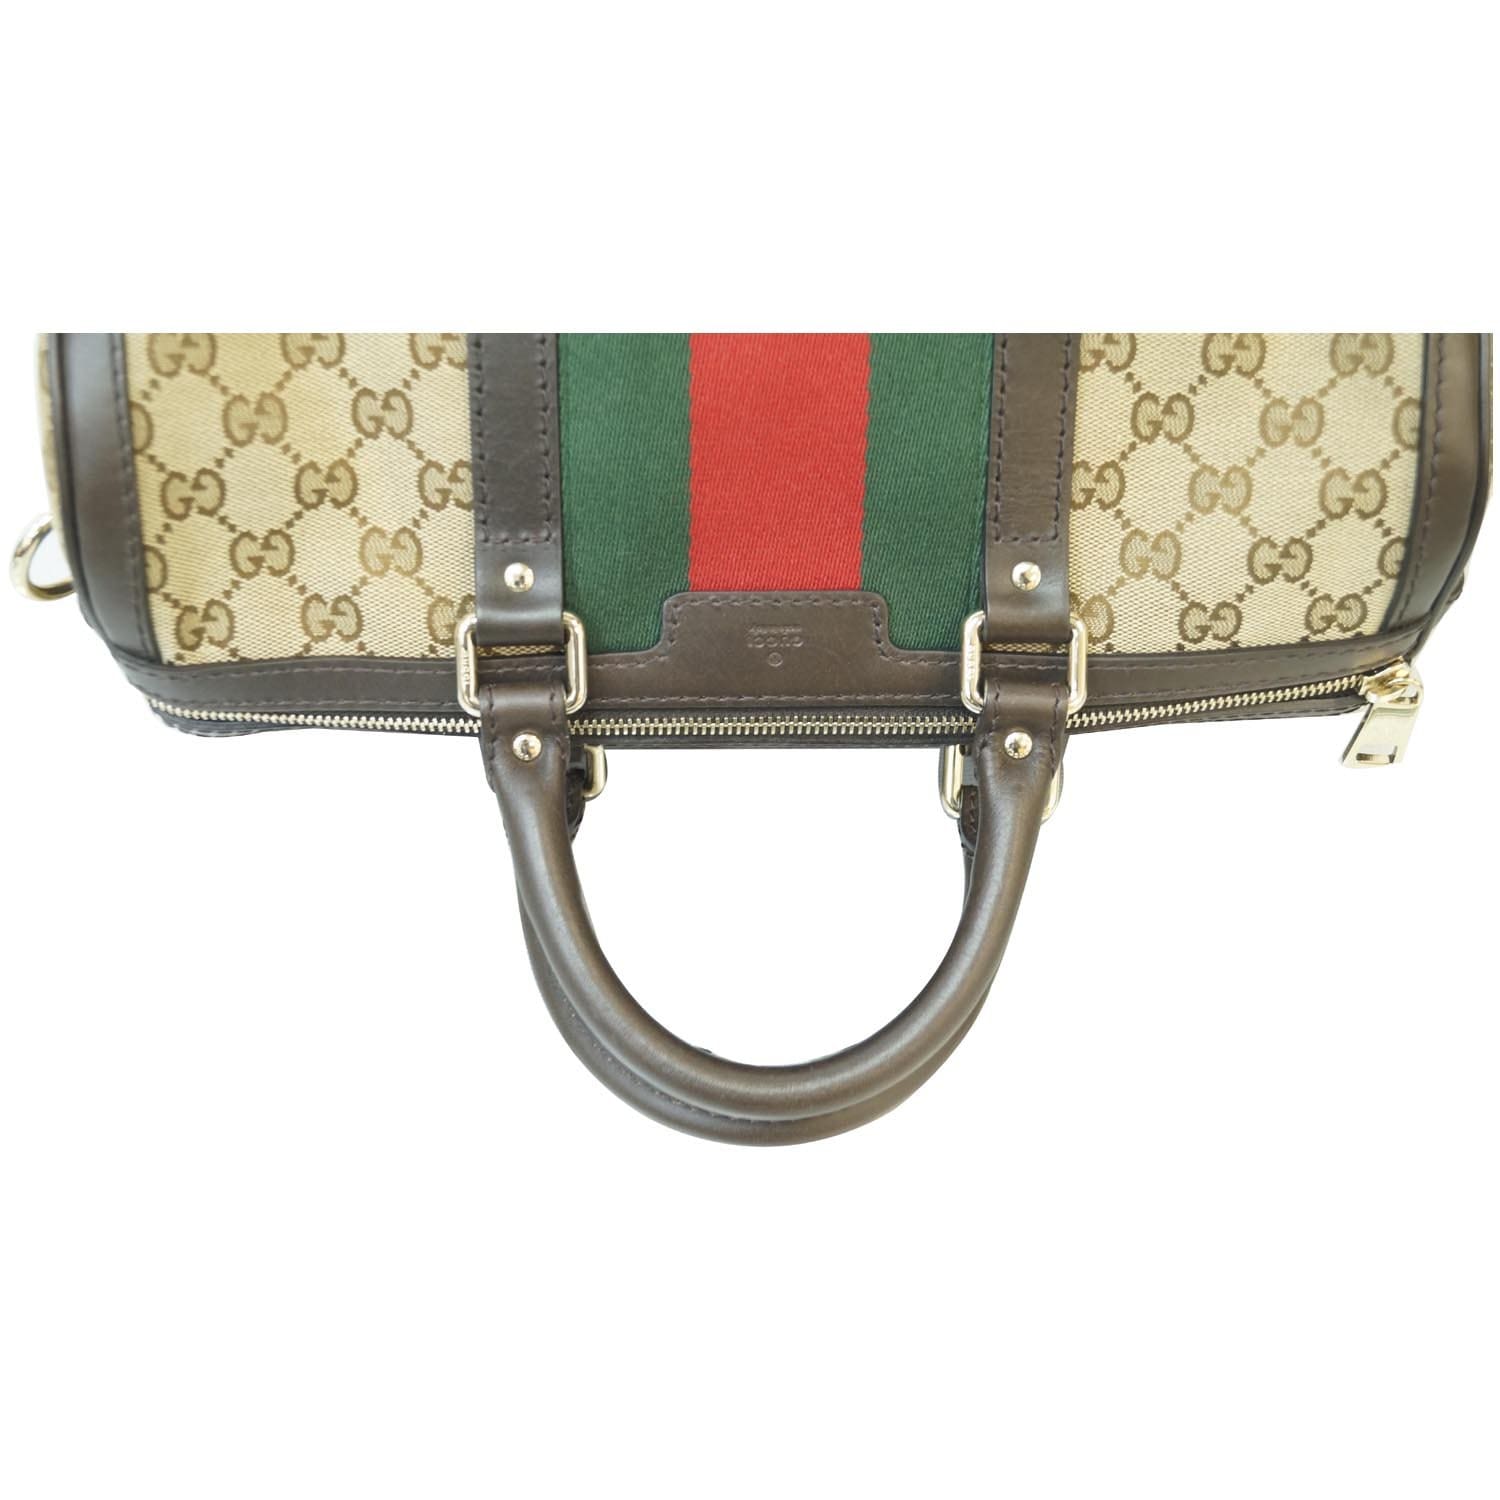 Gucci Watch Bands - Repurposed from Vintage Gucci Bags